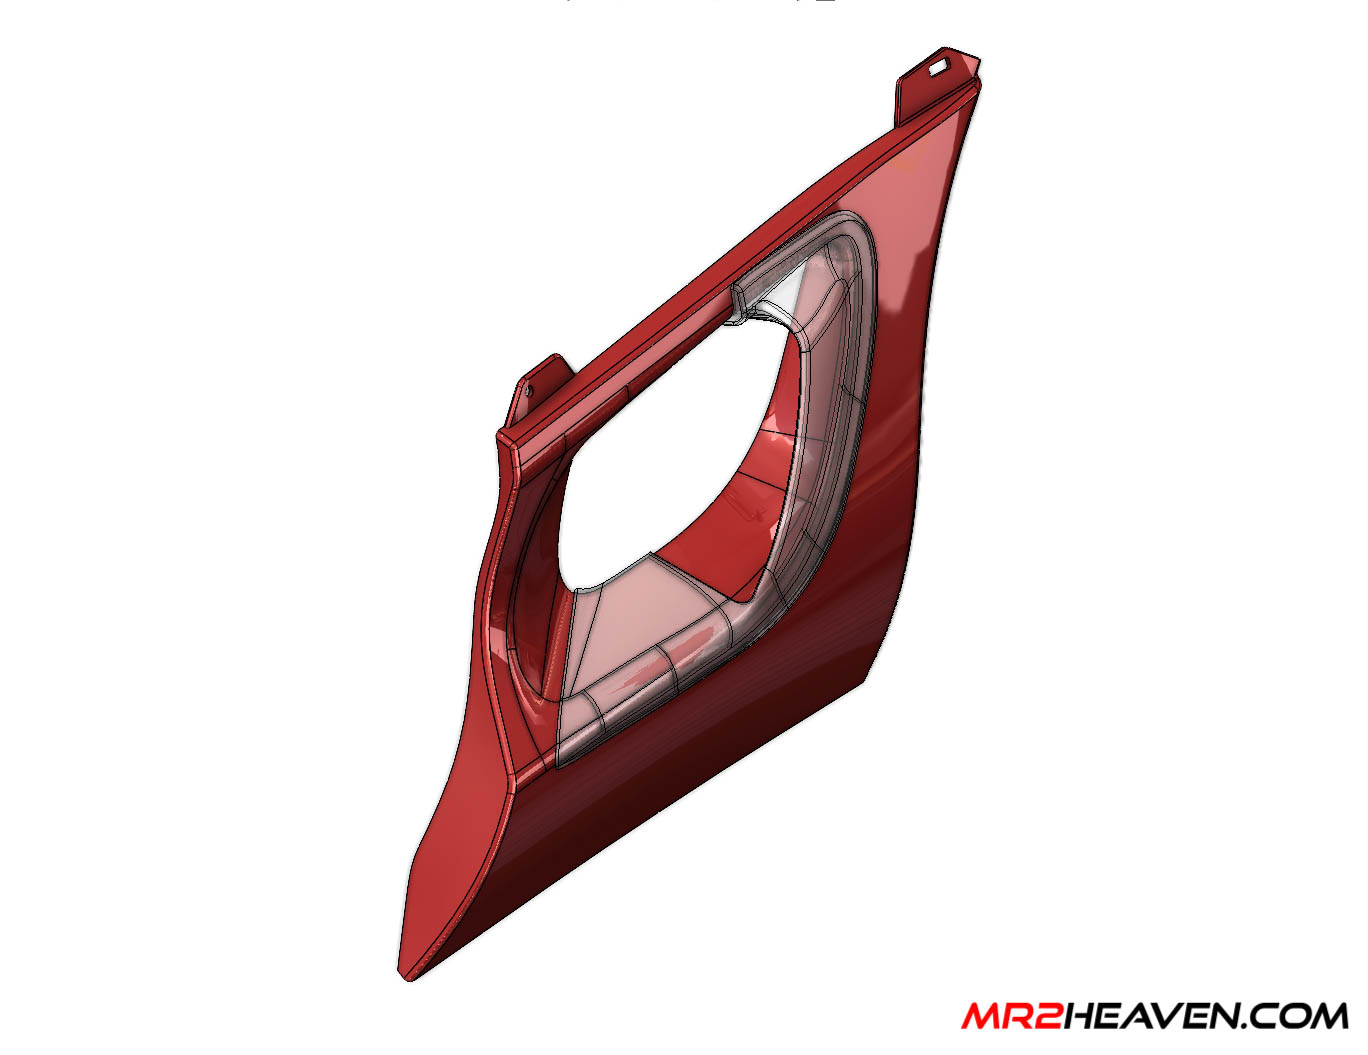 ⚡️ ⚡️ MR2Heaven 5 New Parts now in stock and LIVE! 💥 💥 - Mr2 Heaven